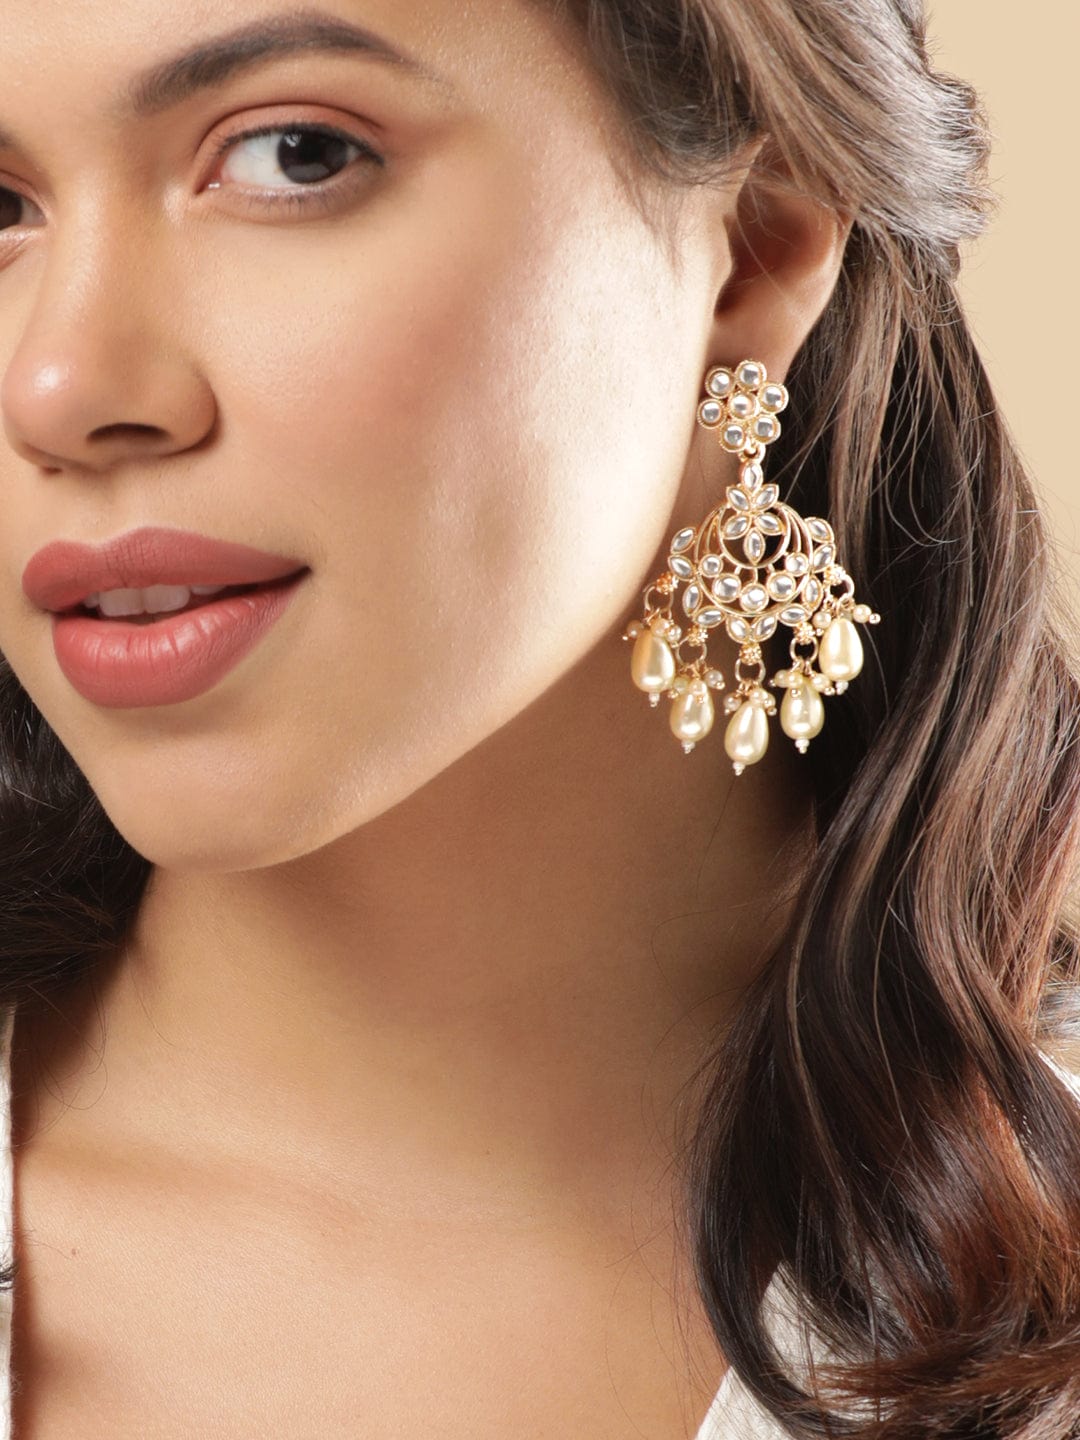 Rubans Gold-Plated Artificial Stones and Beads Studded Jhumkas Earrings Earrings